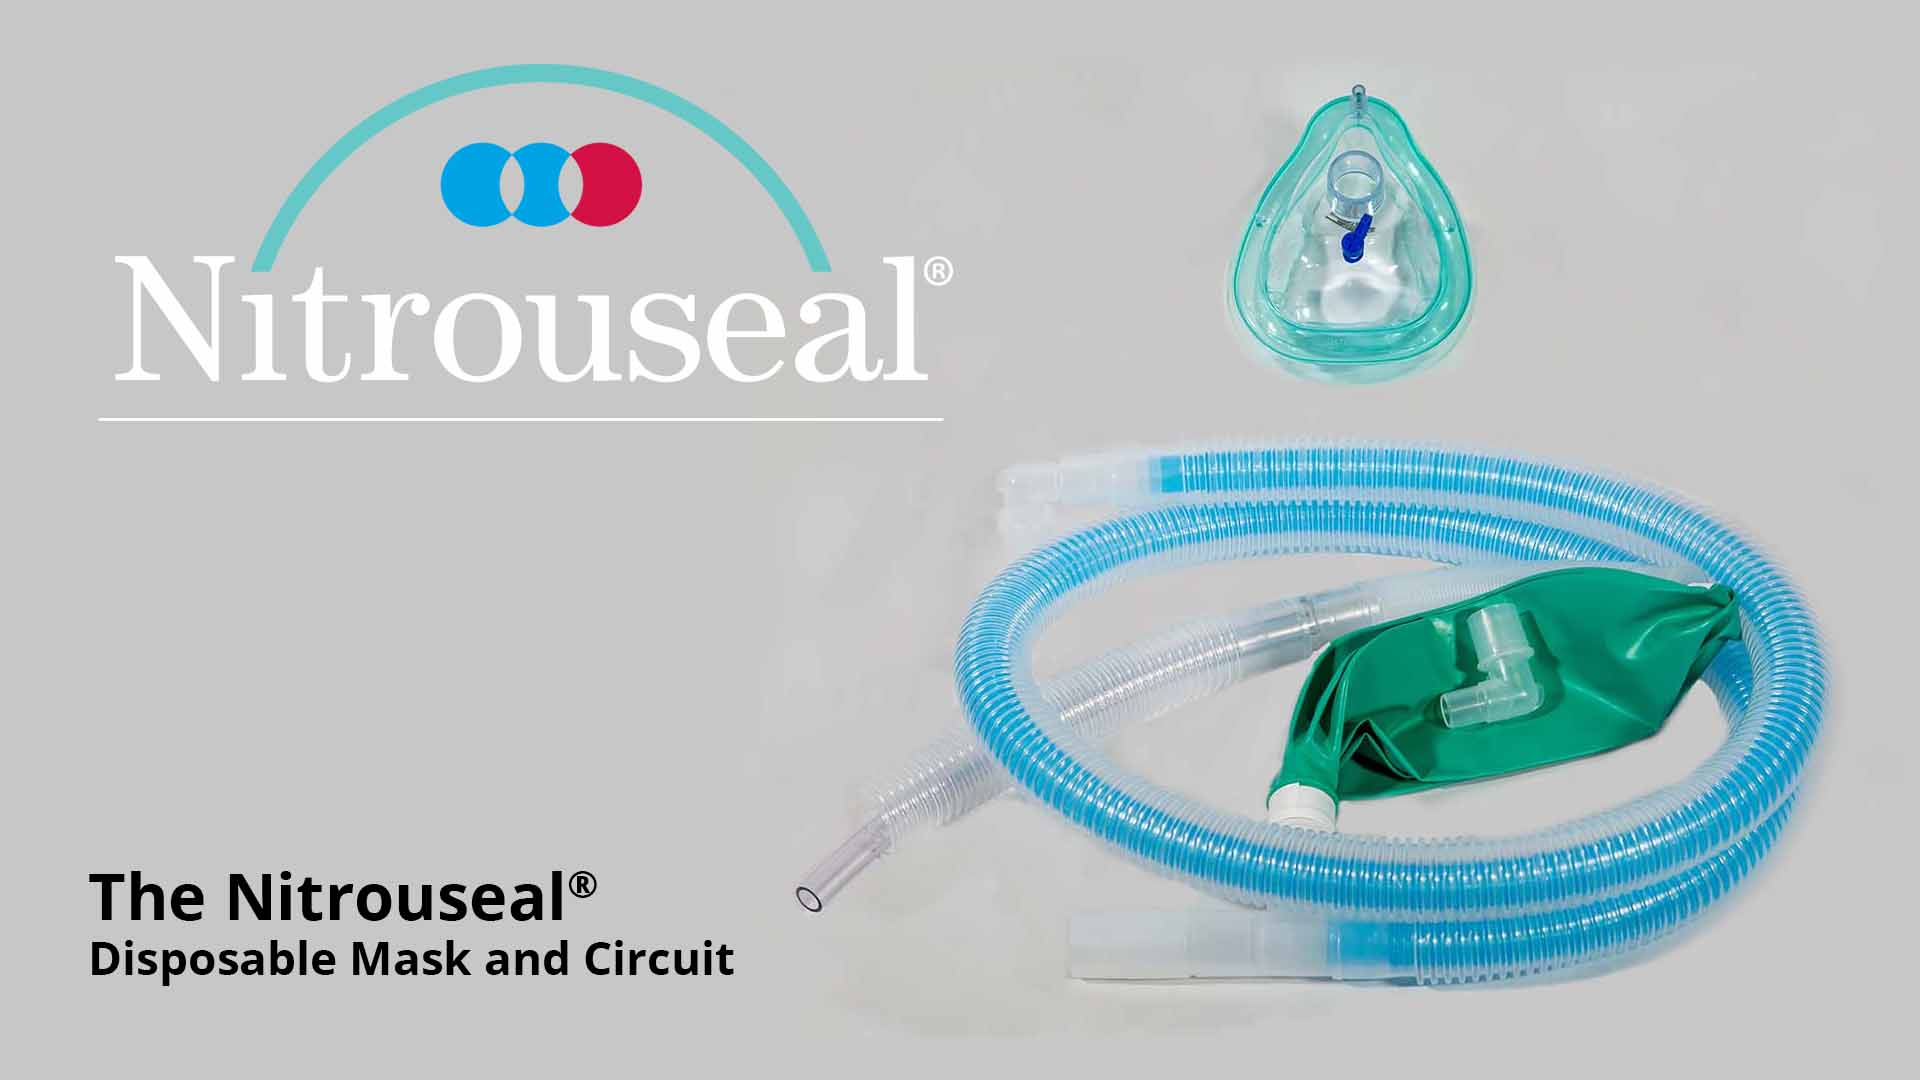 The Nitrouseal® Disposable Mask and Circuit